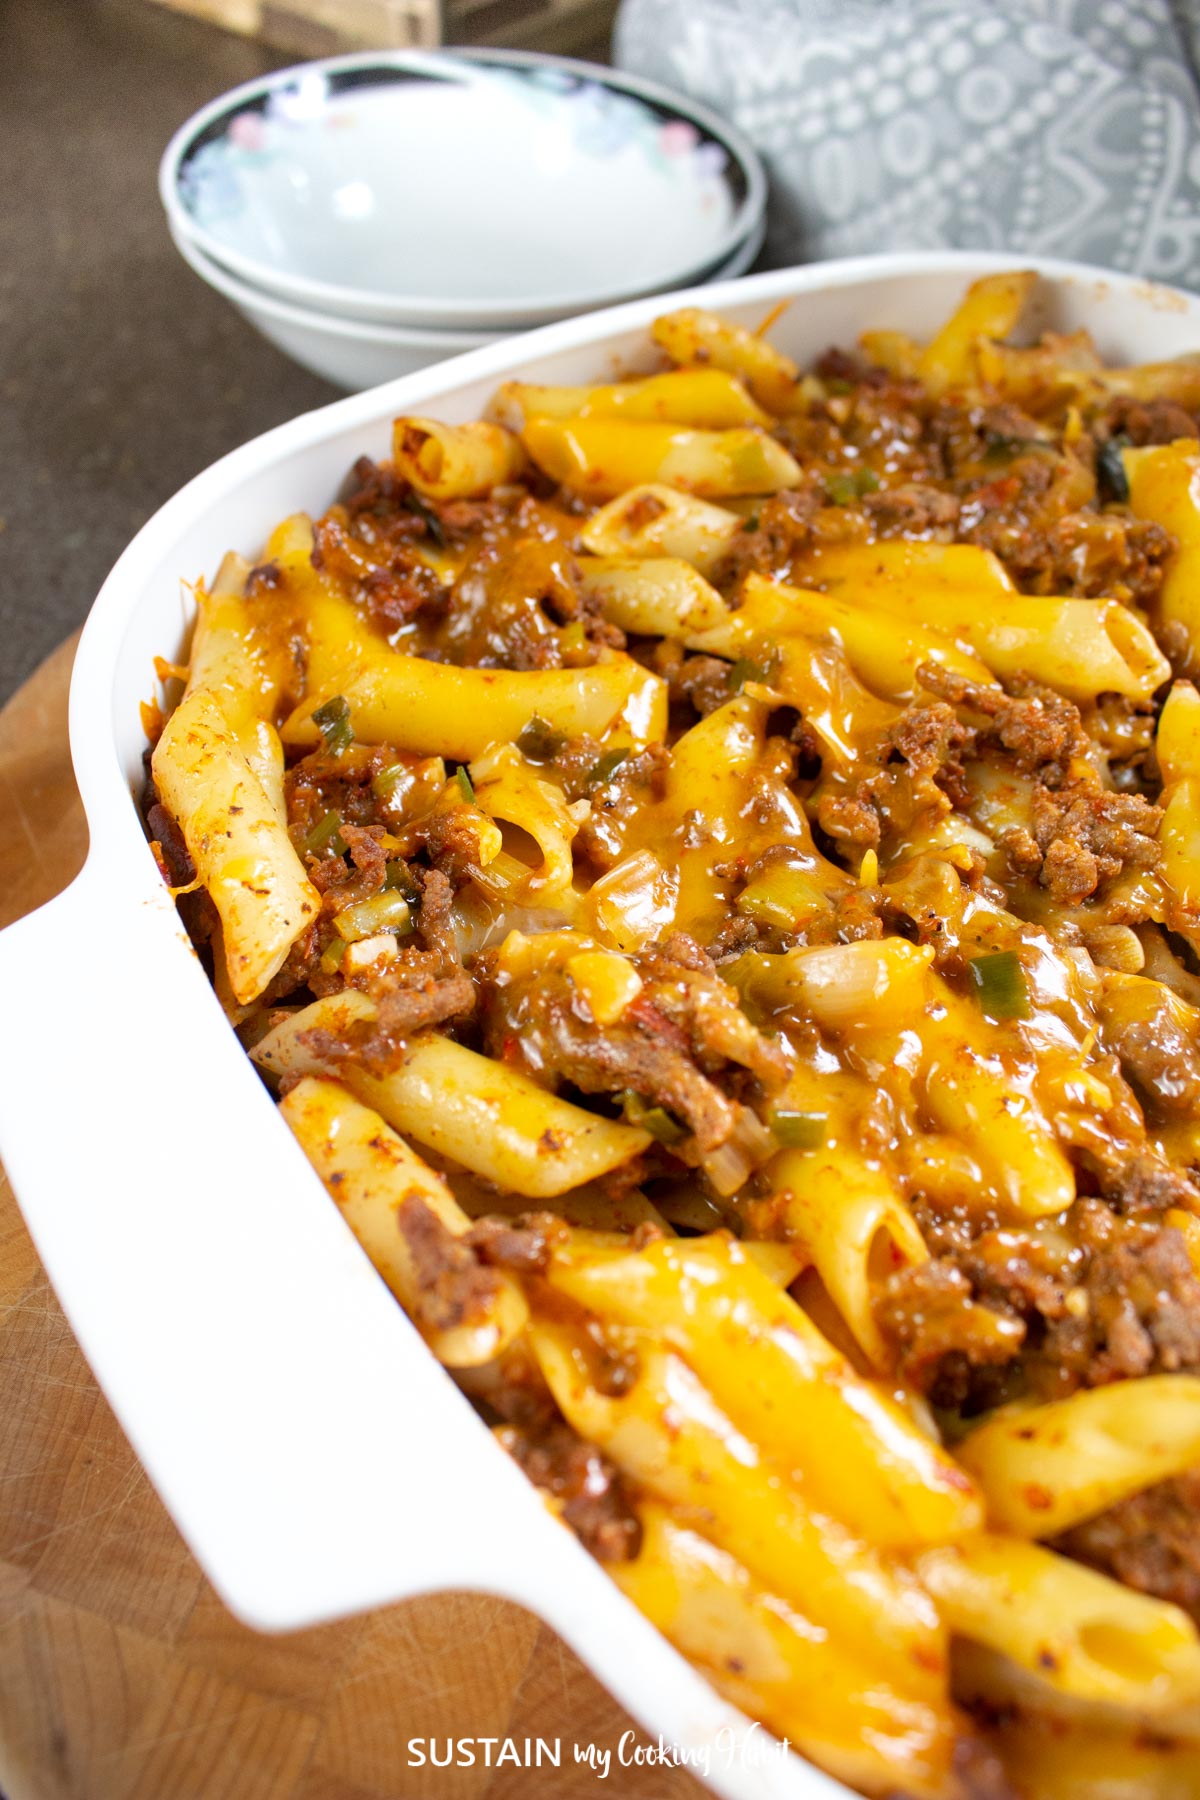 Baked penne pasta with ground beef in a serving dish.